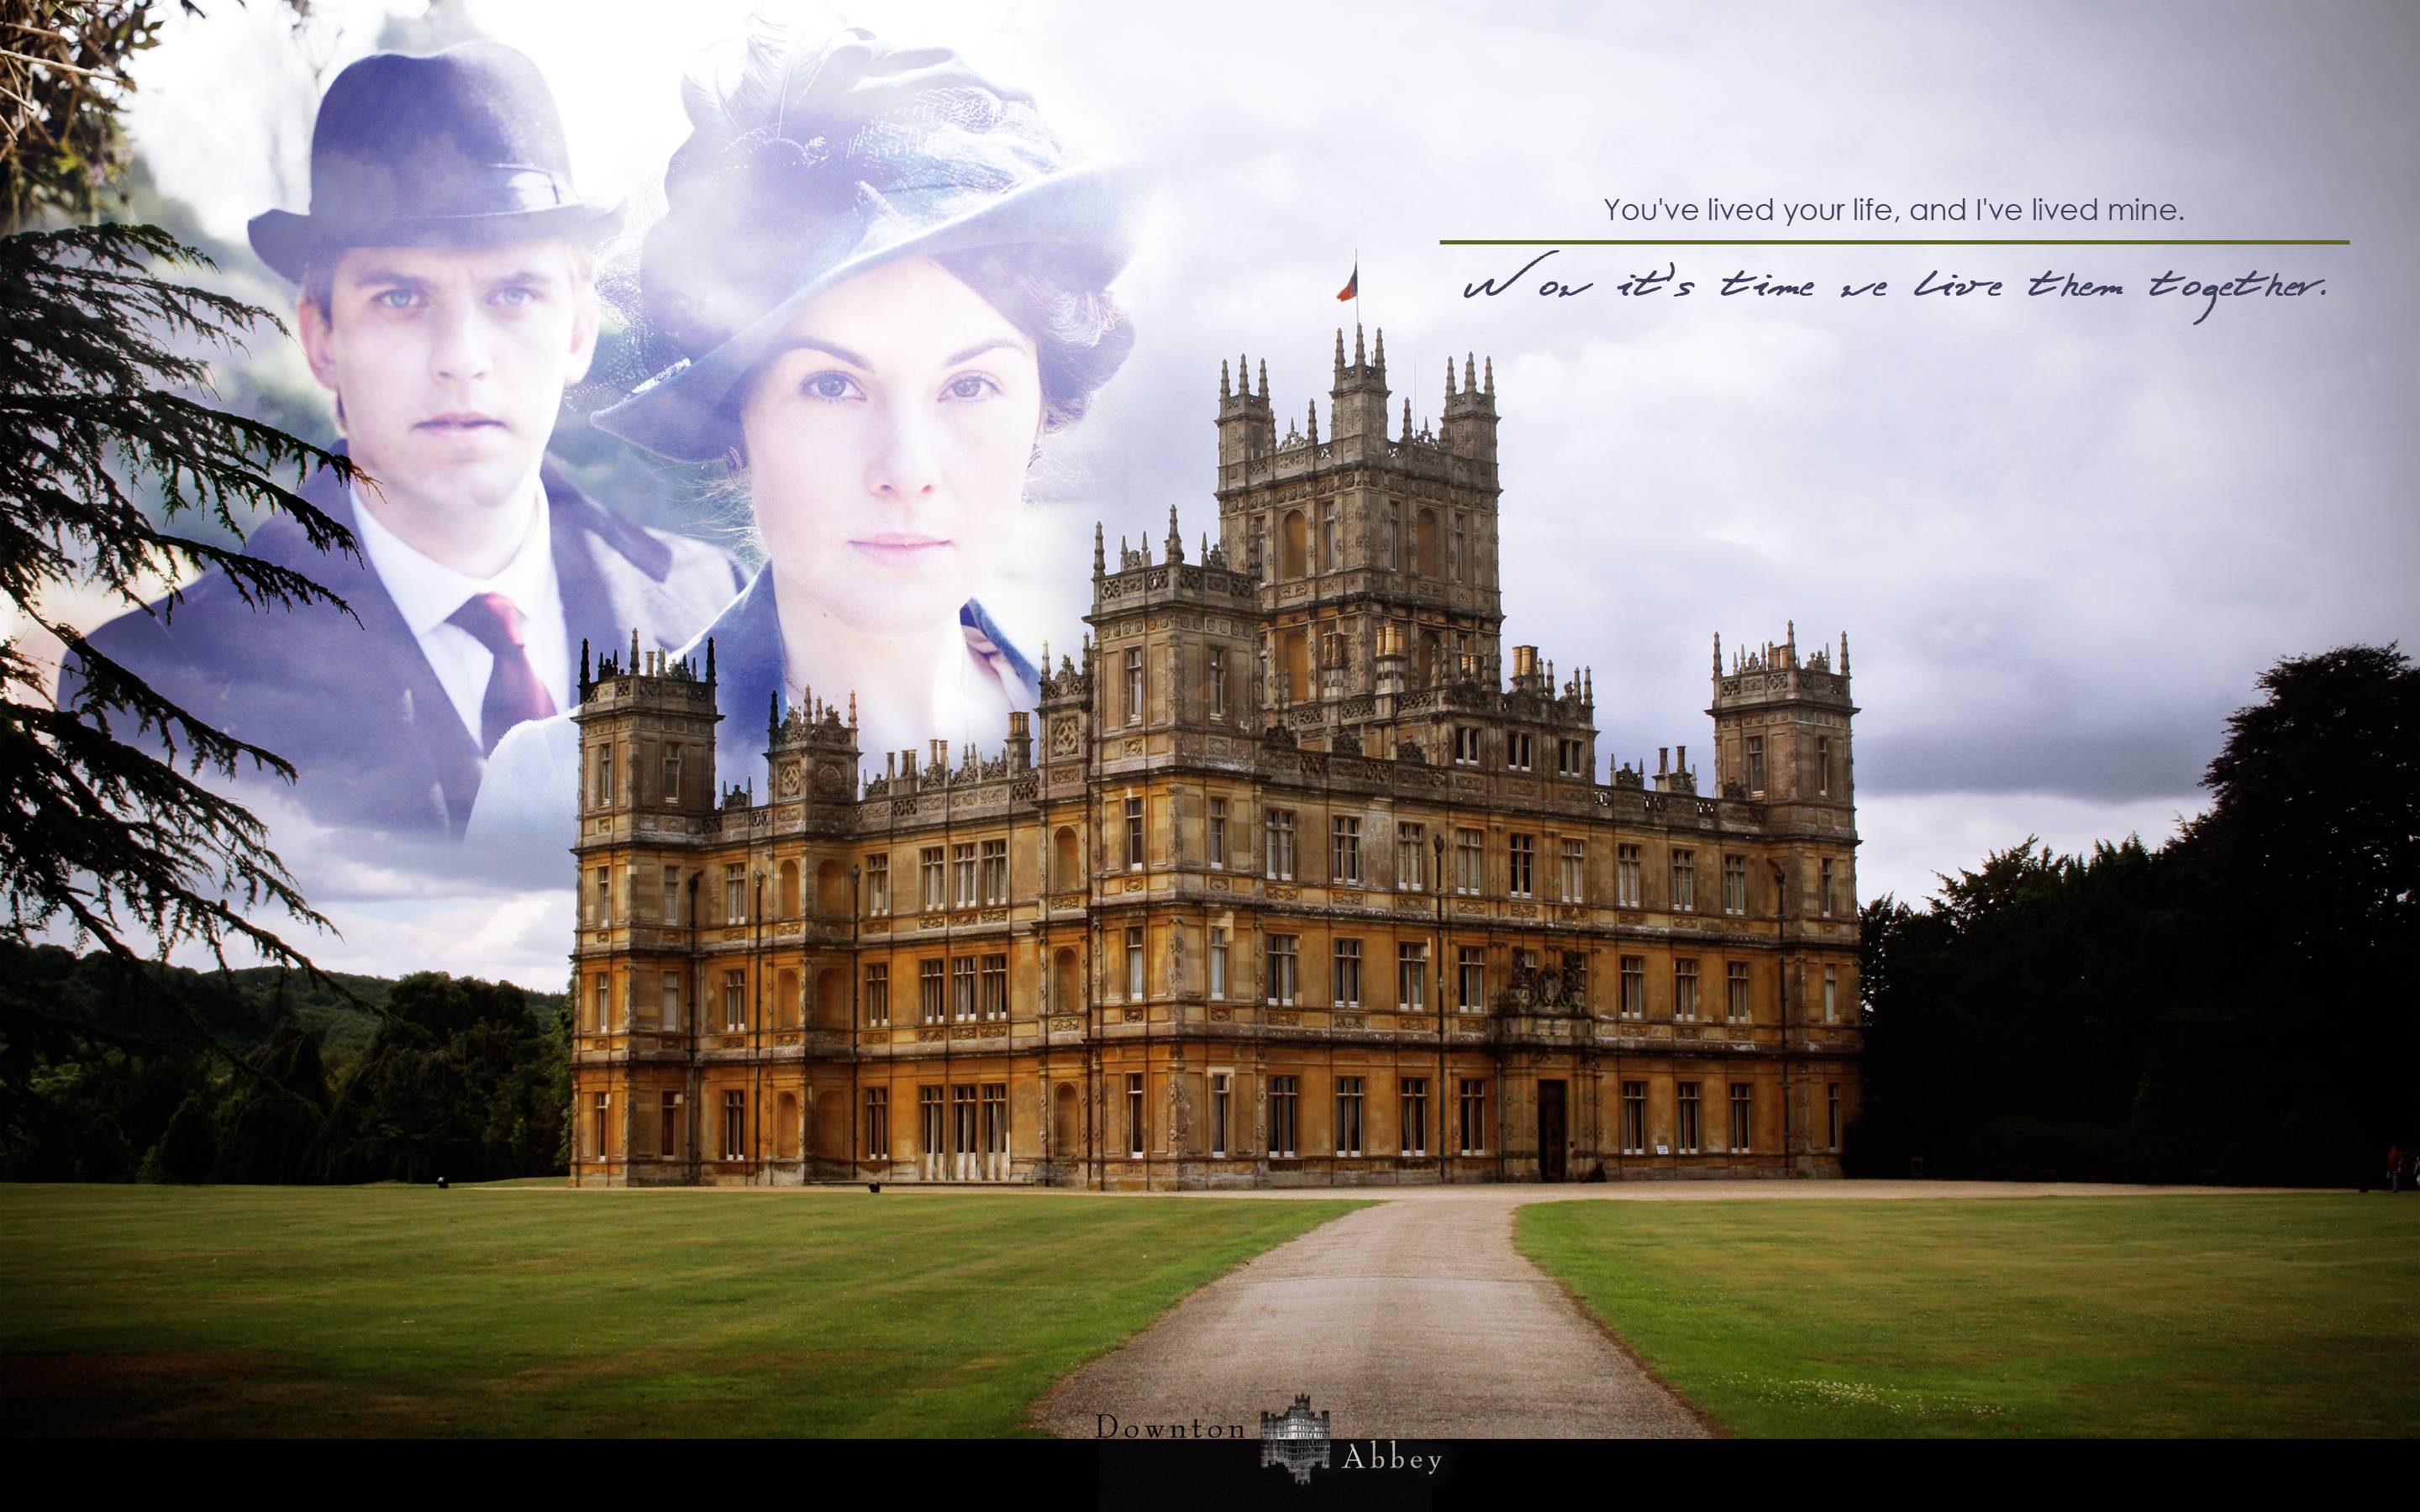 where can i download downton abbey for free